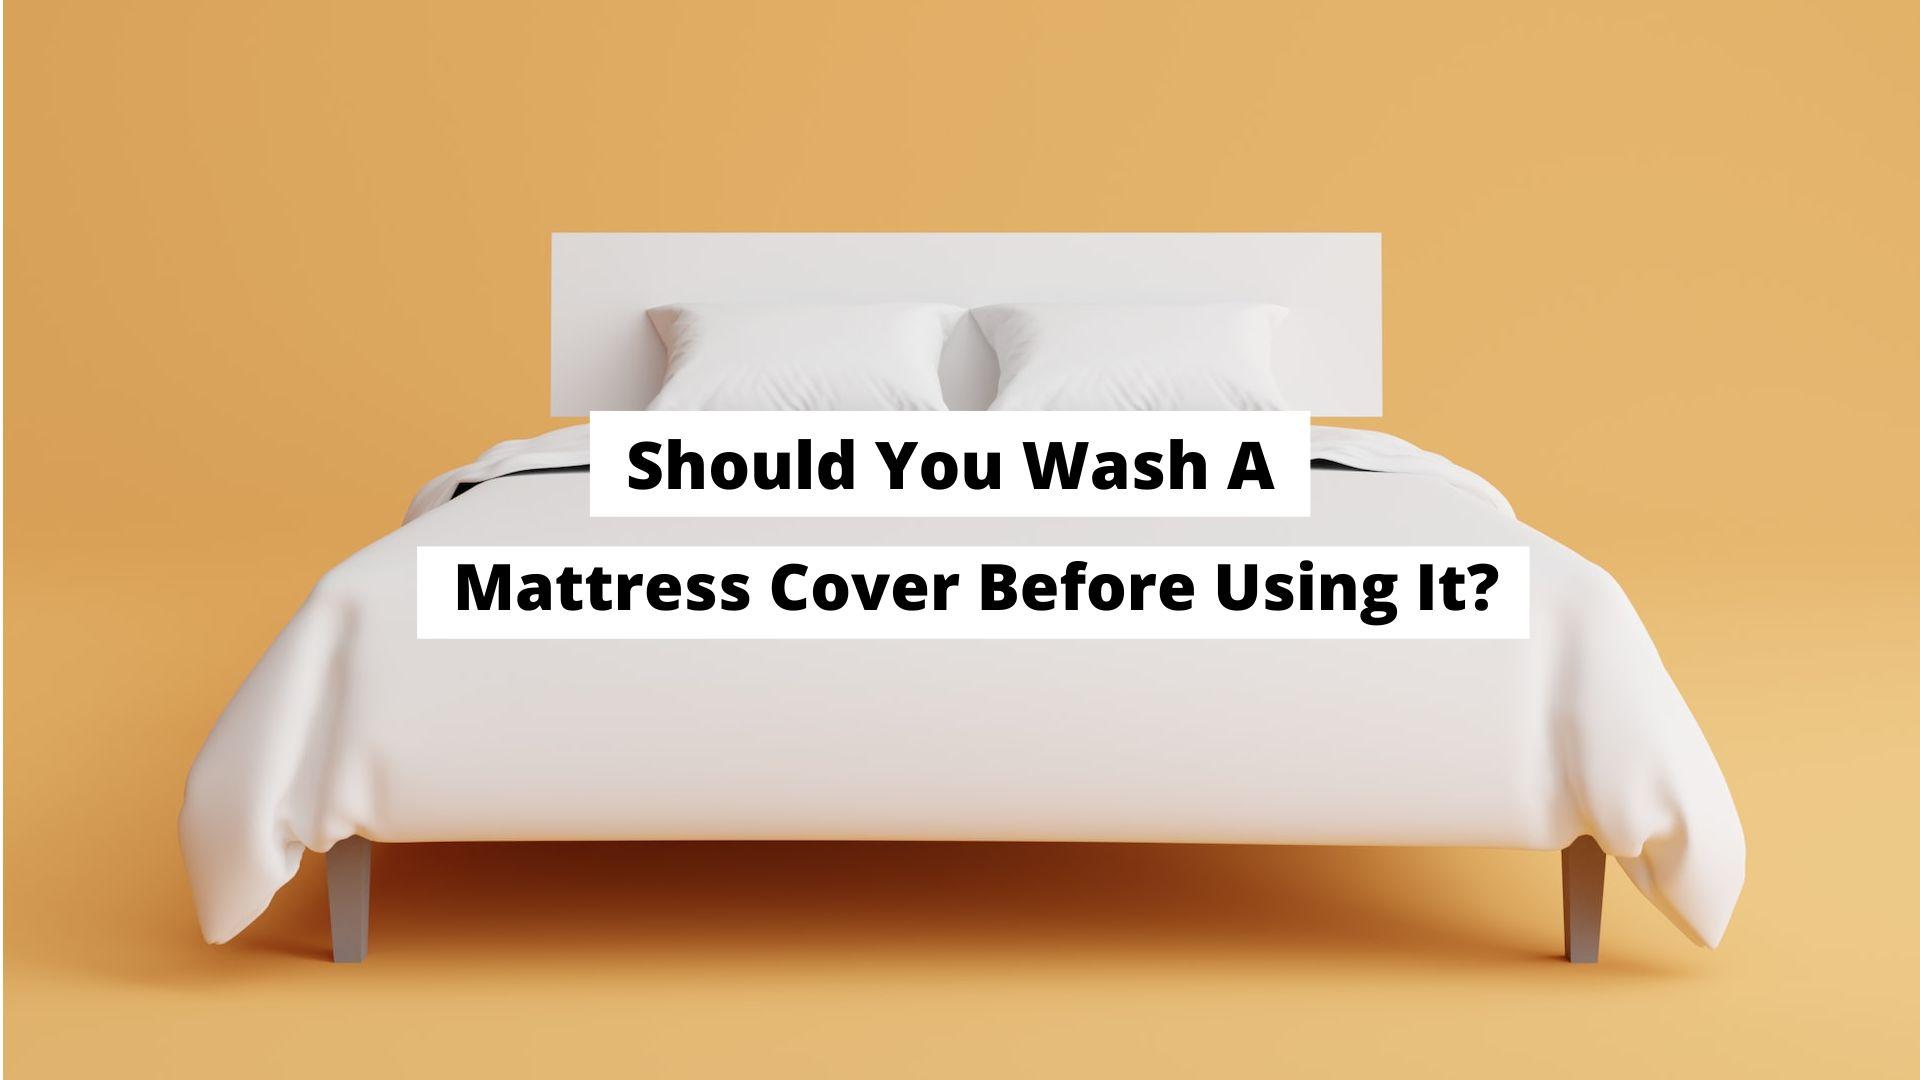 Should You Wash A Mattress Cover Before Using It